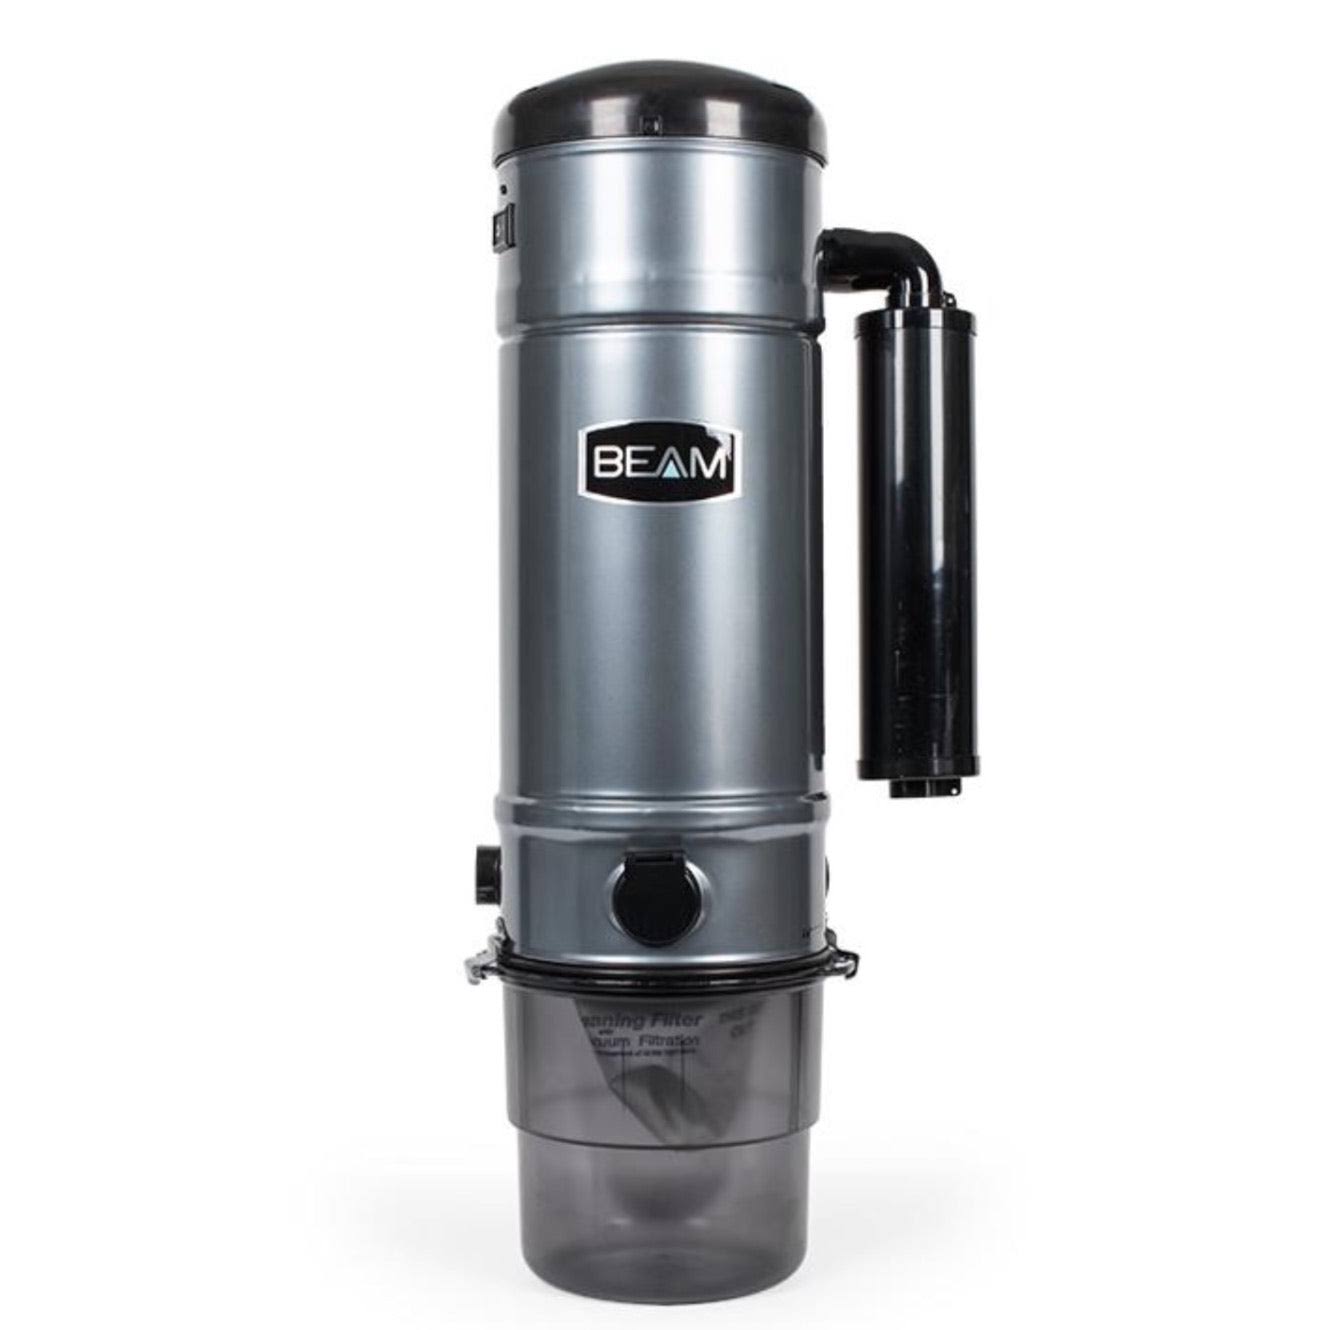 Beam Serenity Series Model SC375 Central Vacuum Canister